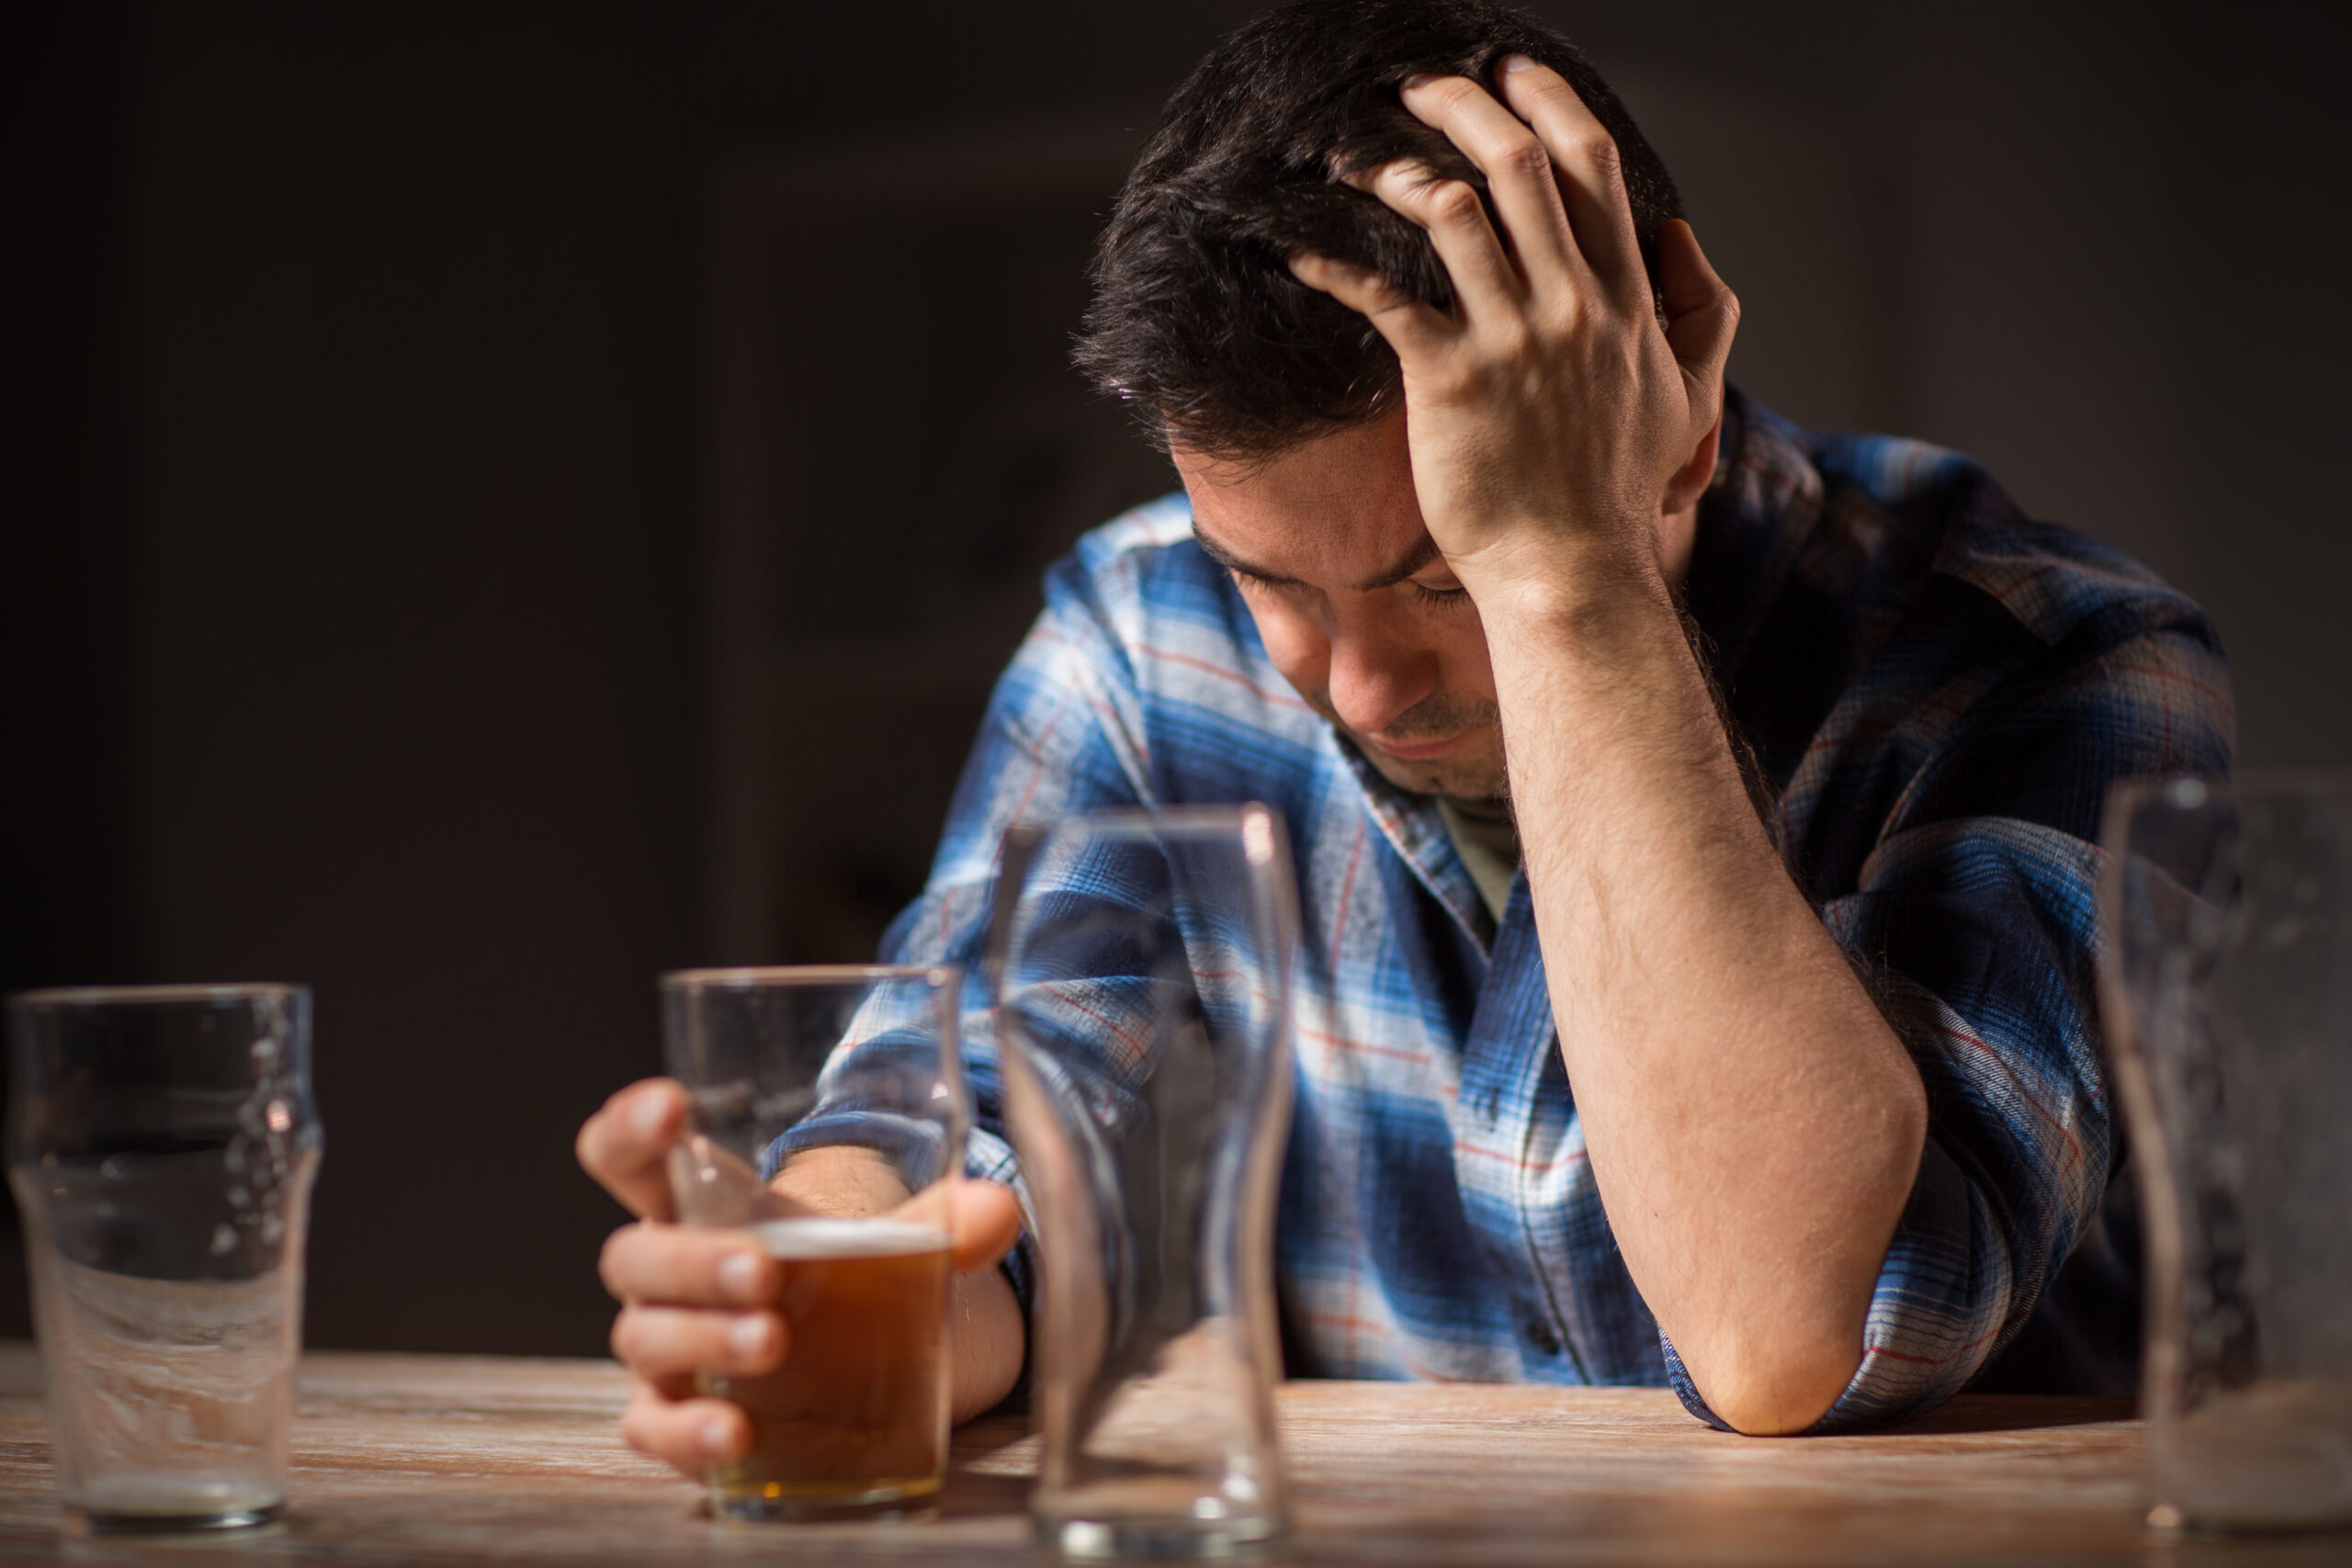 How much does alcohol rehab cost?